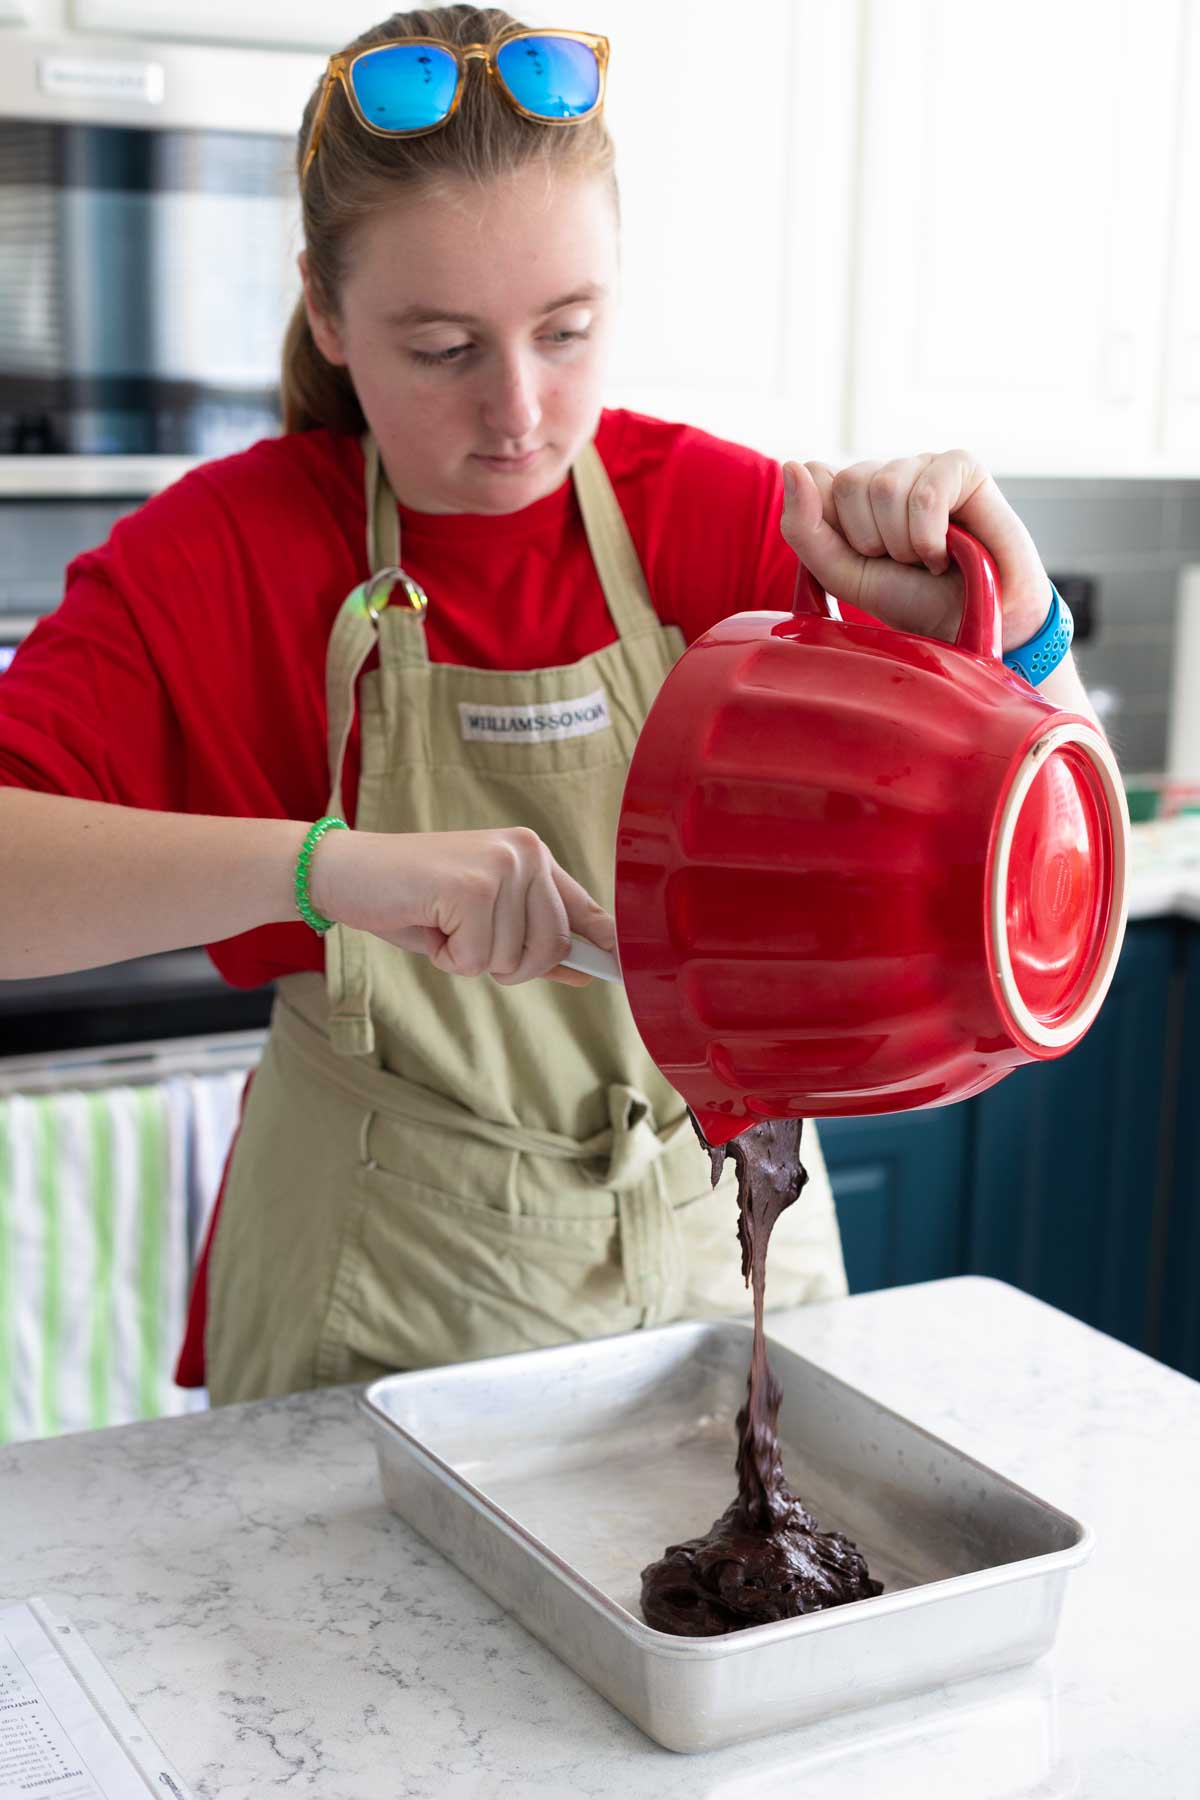 A young girl scrapes prepared brownie batter into a baking pan.